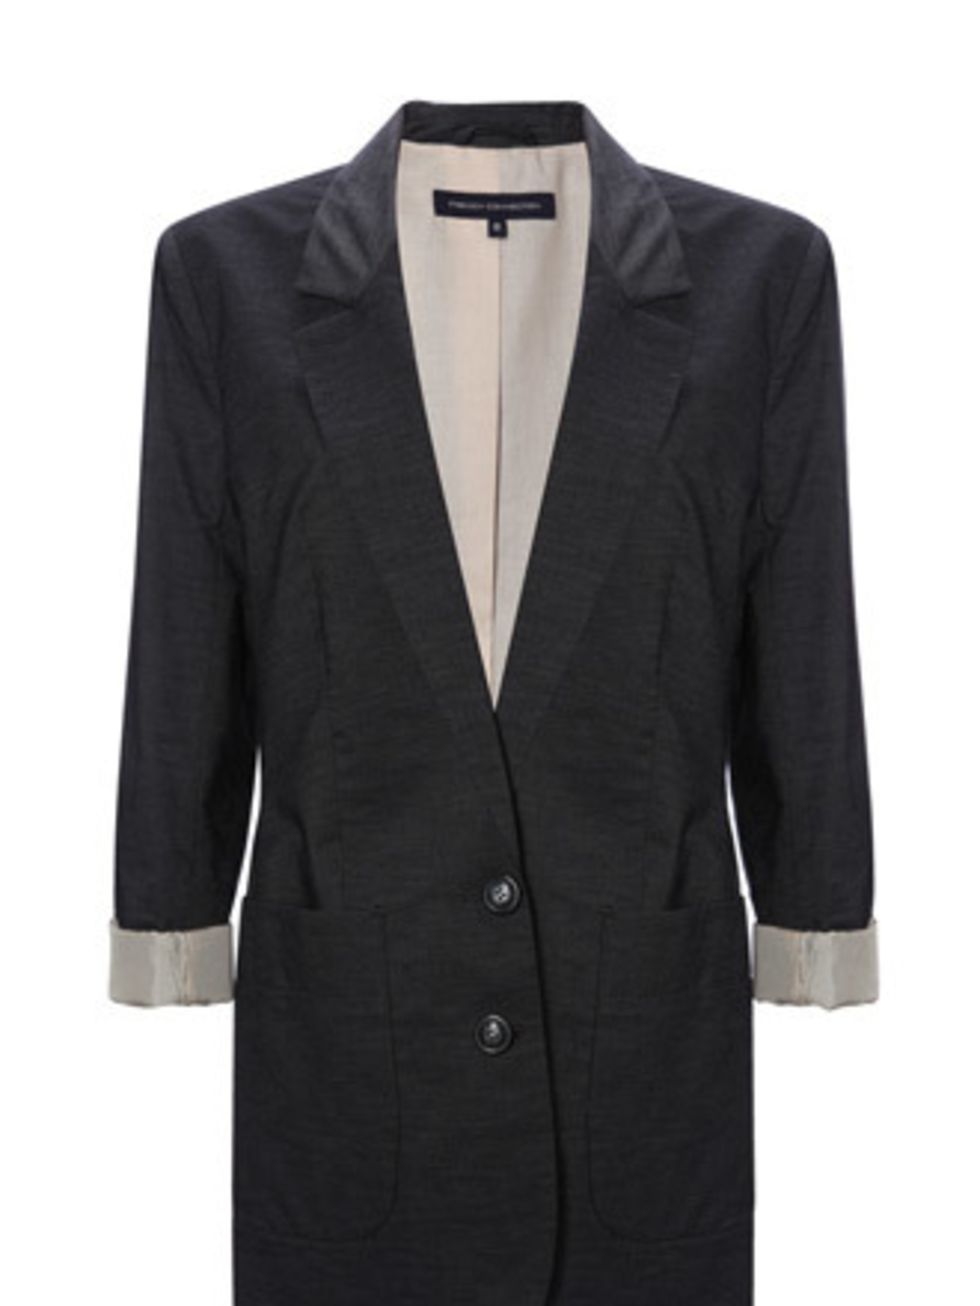 <p>Thanks to its practicality and ability to smarten up any outfit, the blazers popularity has yet to wane. This light-weight cotton version is a must-buy for your new season wardrobe.</p><p>Cotton blazer, £115 by <a href="http://www.frenchconnection.com